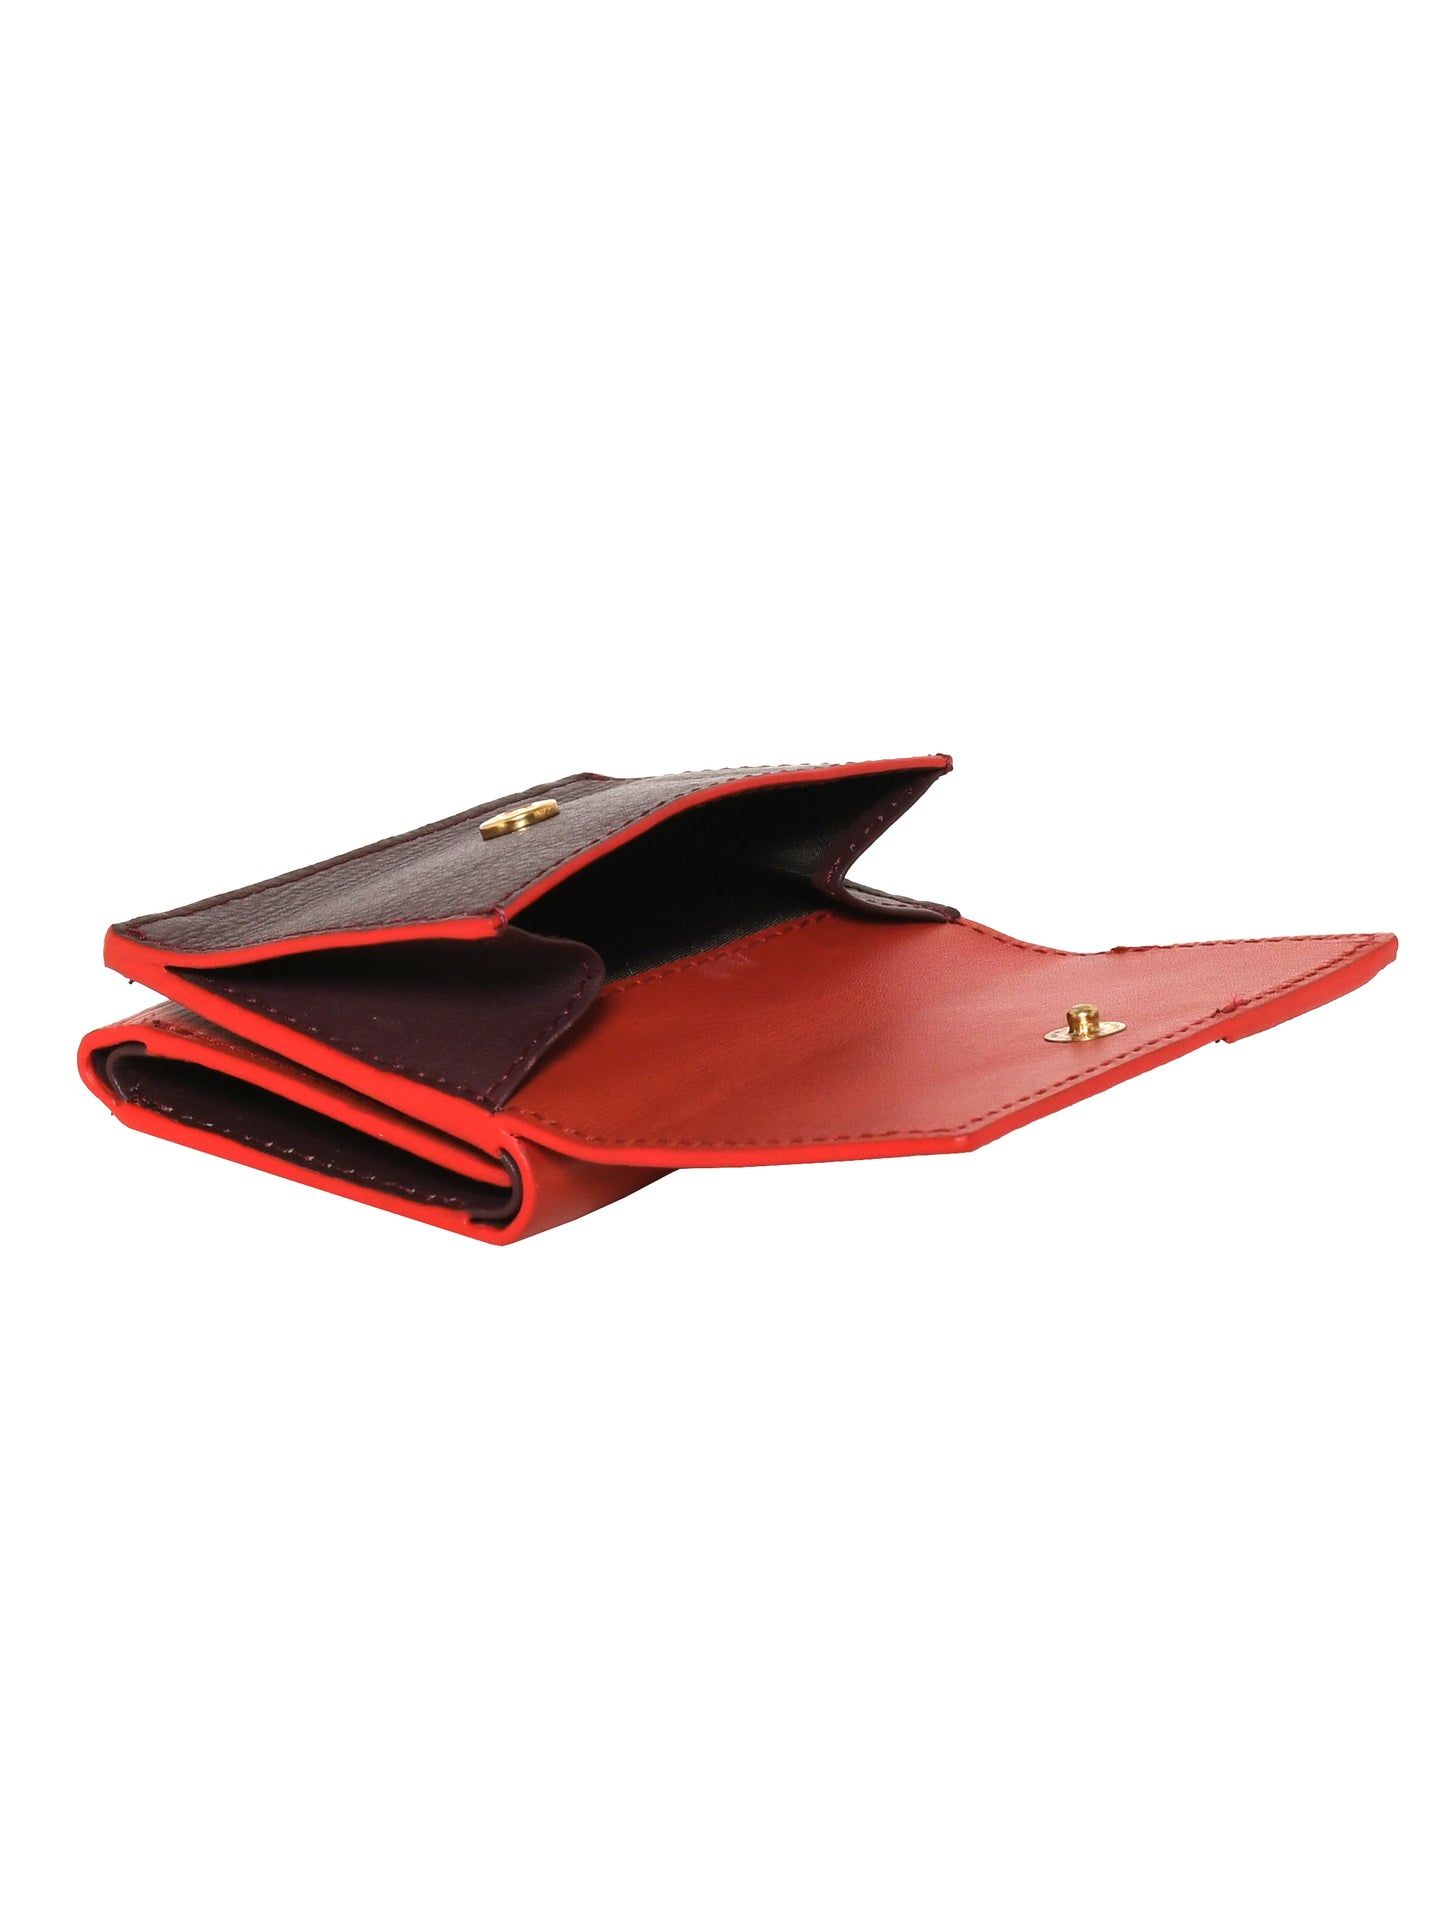 Trifold Wallet for Women- Red/Burgundy